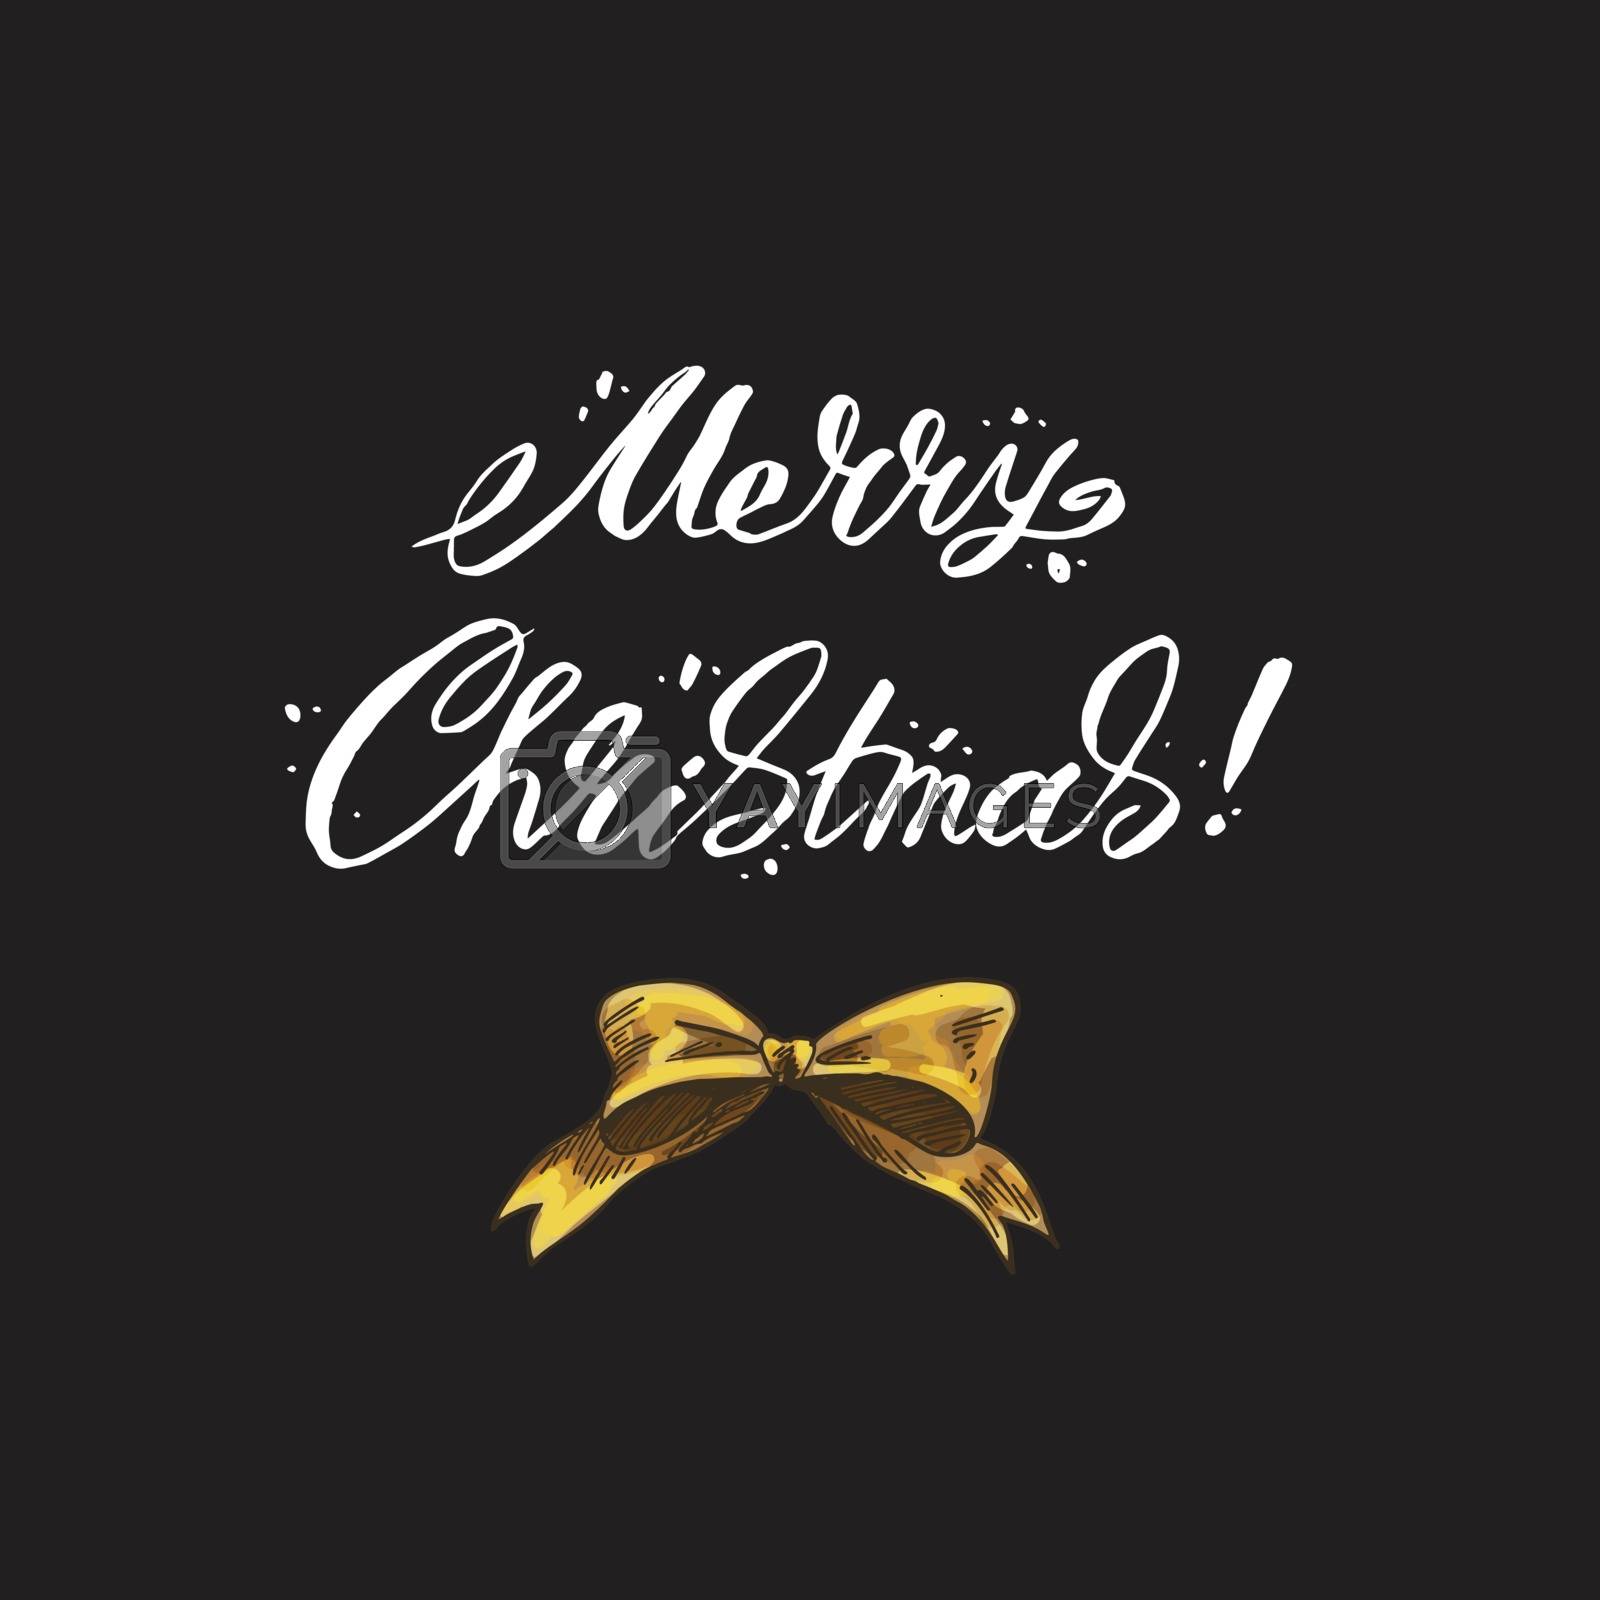 Royalty free image of Merry Christmas lettering on a black background. Vector illustration. by nutela_pancake